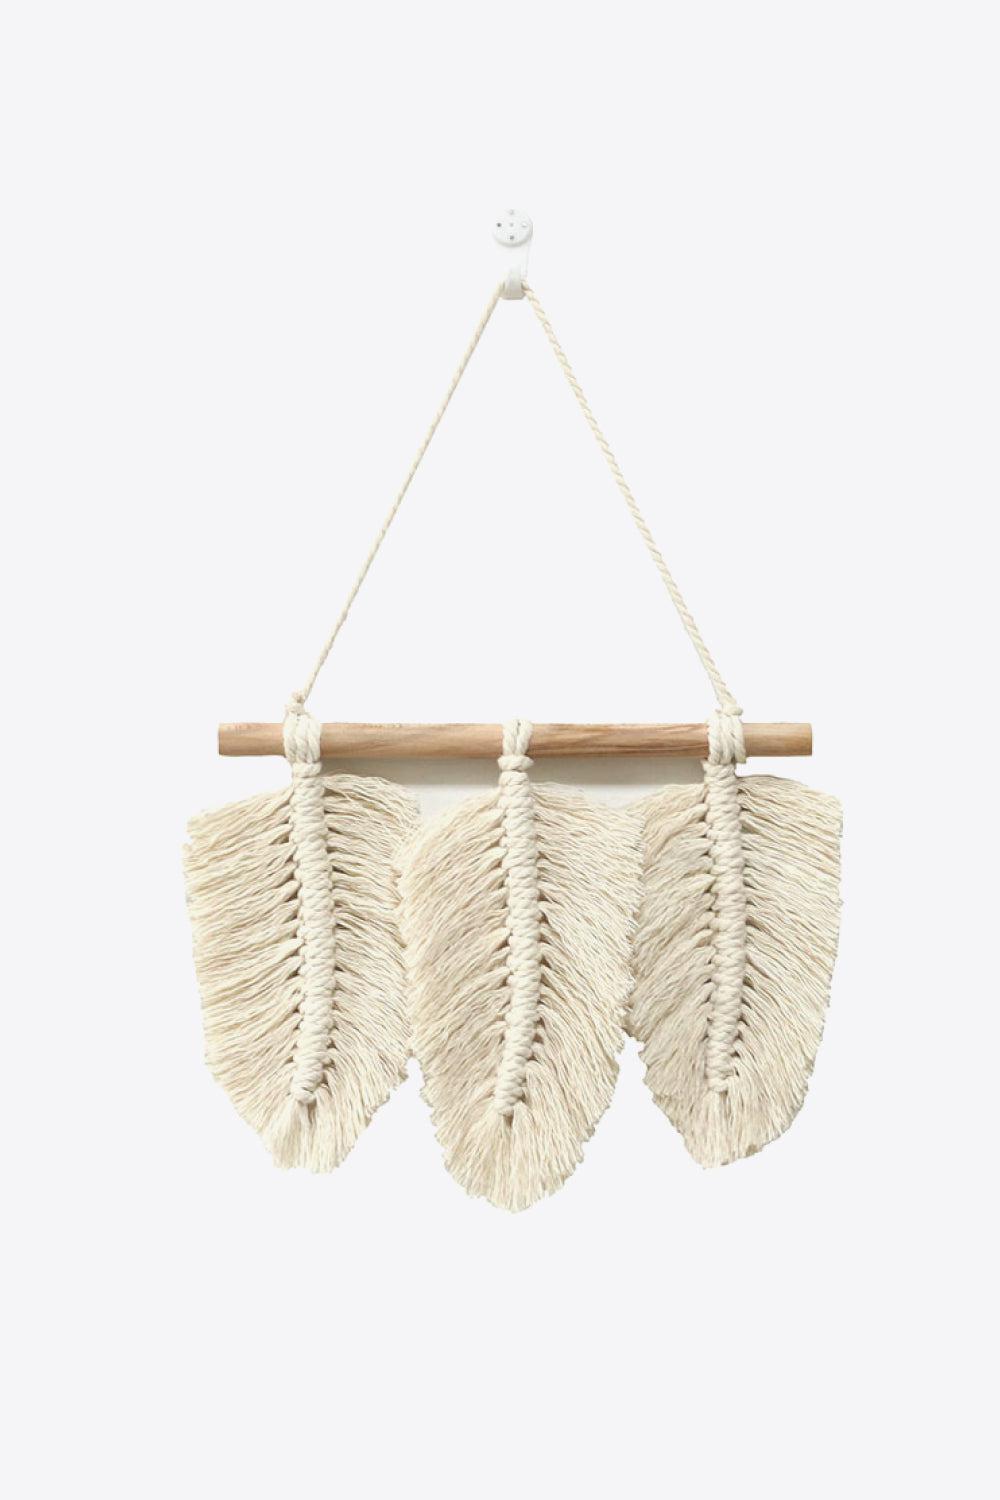 Feather Wall Hanging BLUE ZONE PLANET